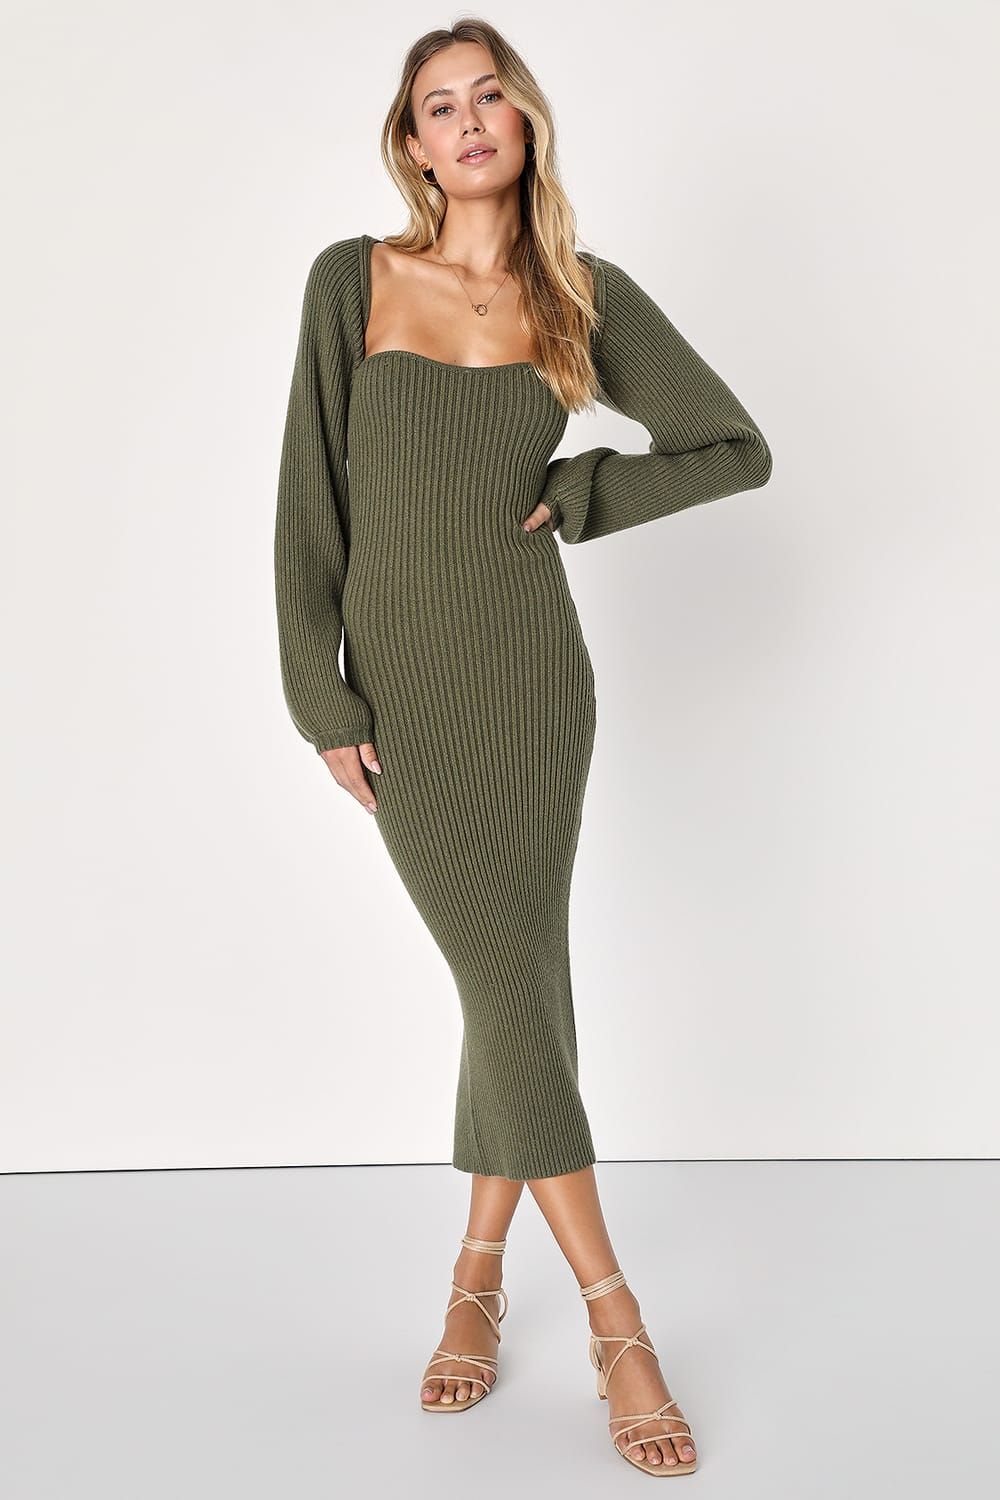 Autumn Aura Olive Green Ribbed Two-Piece Sweater Dress | Lulus (US)